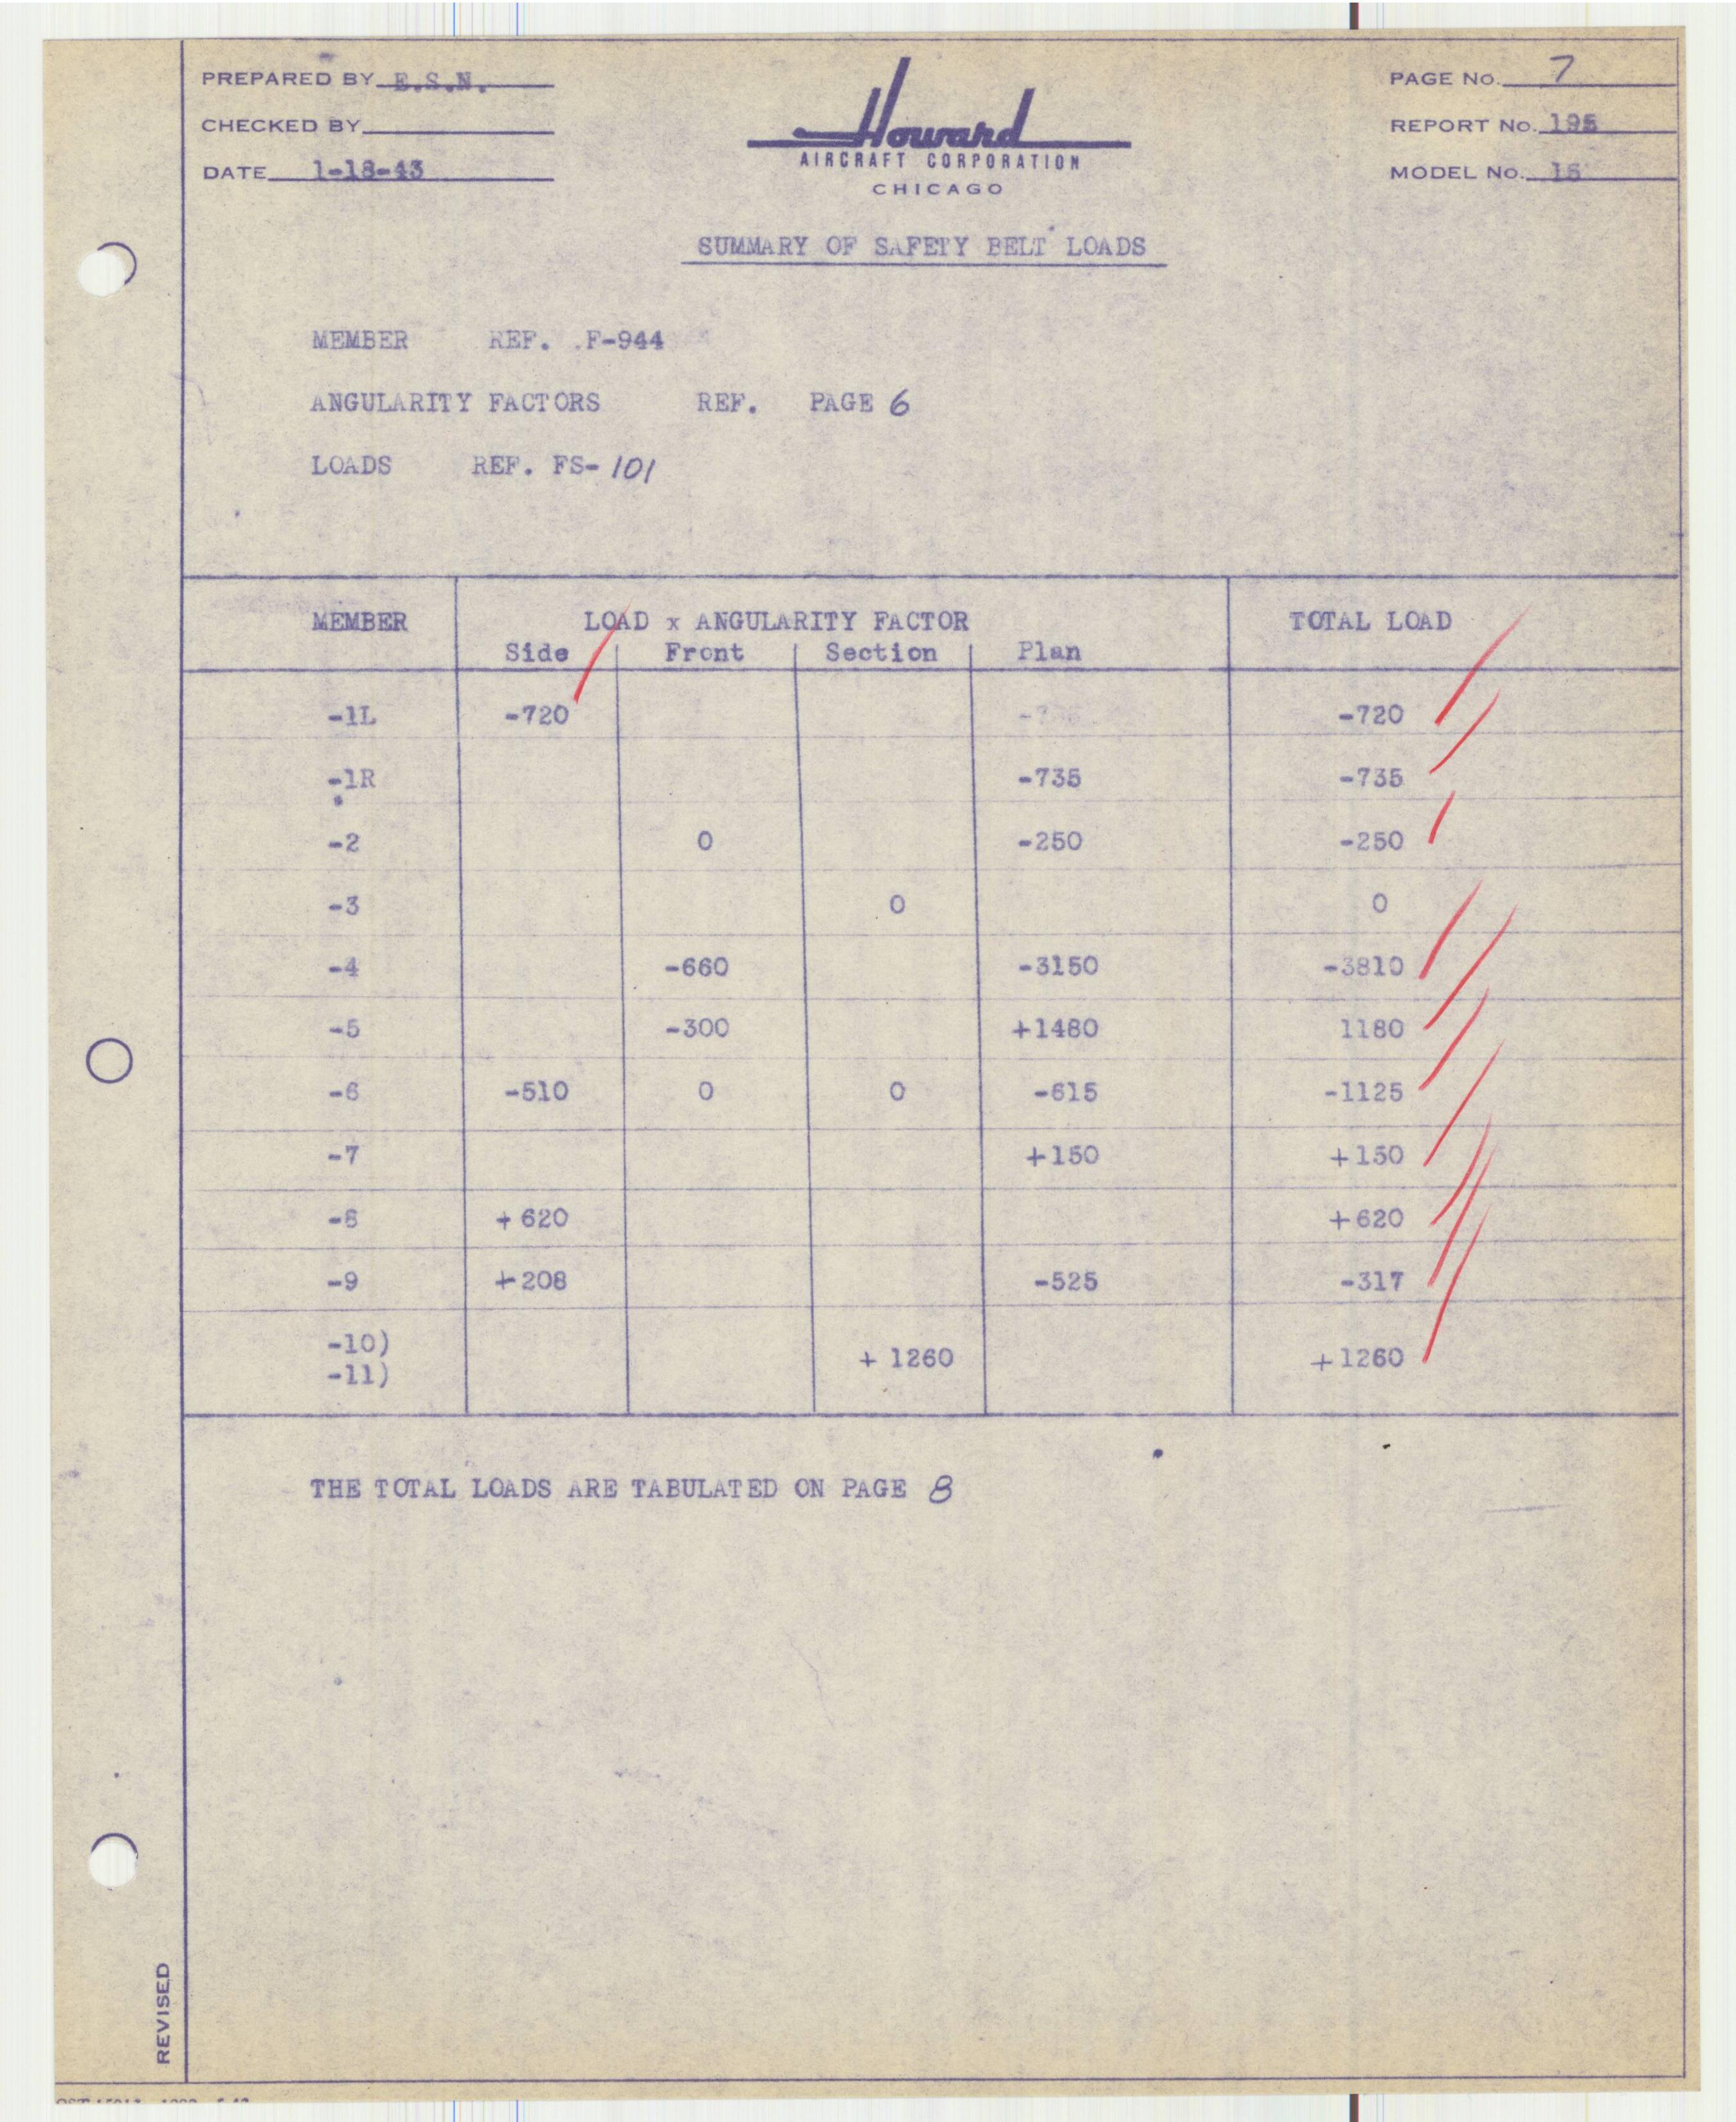 Sample page 8 from AirCorps Library document: Report 195, Analysis of Revised Seat Base, DGA-15